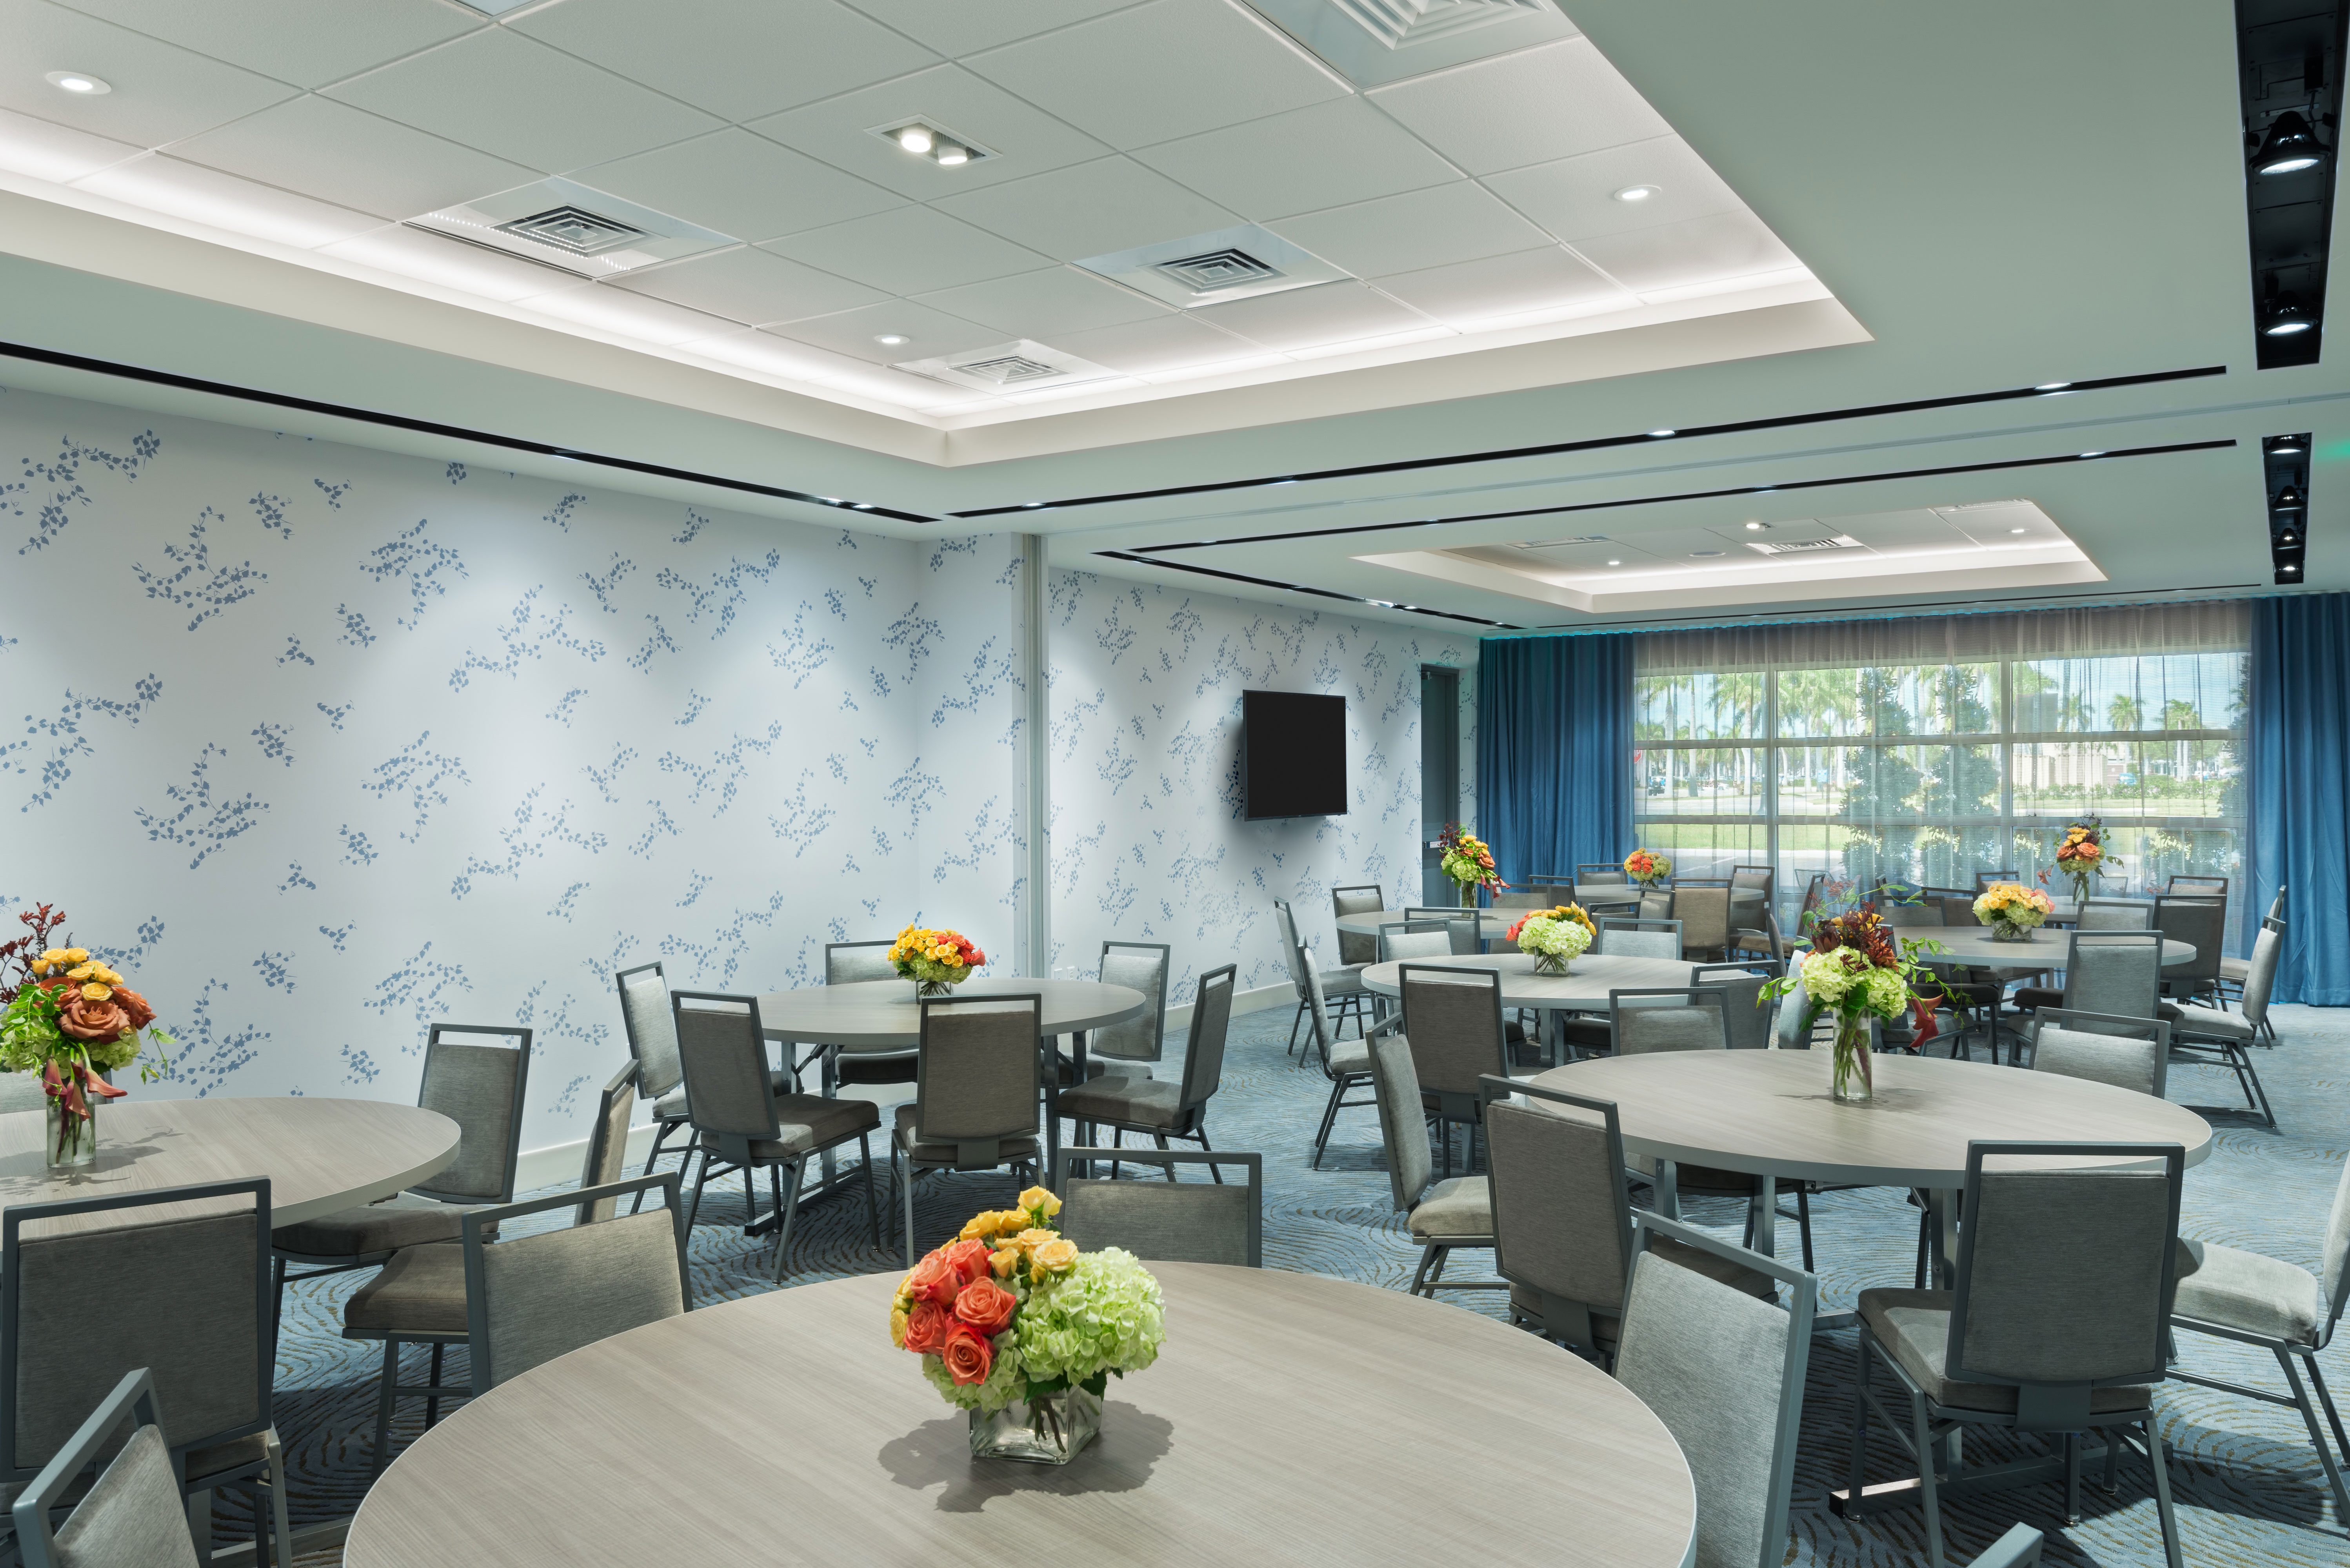 Meeting Room With TV, Seating at Round Tables with Floral Centerpieces, and an Outside View